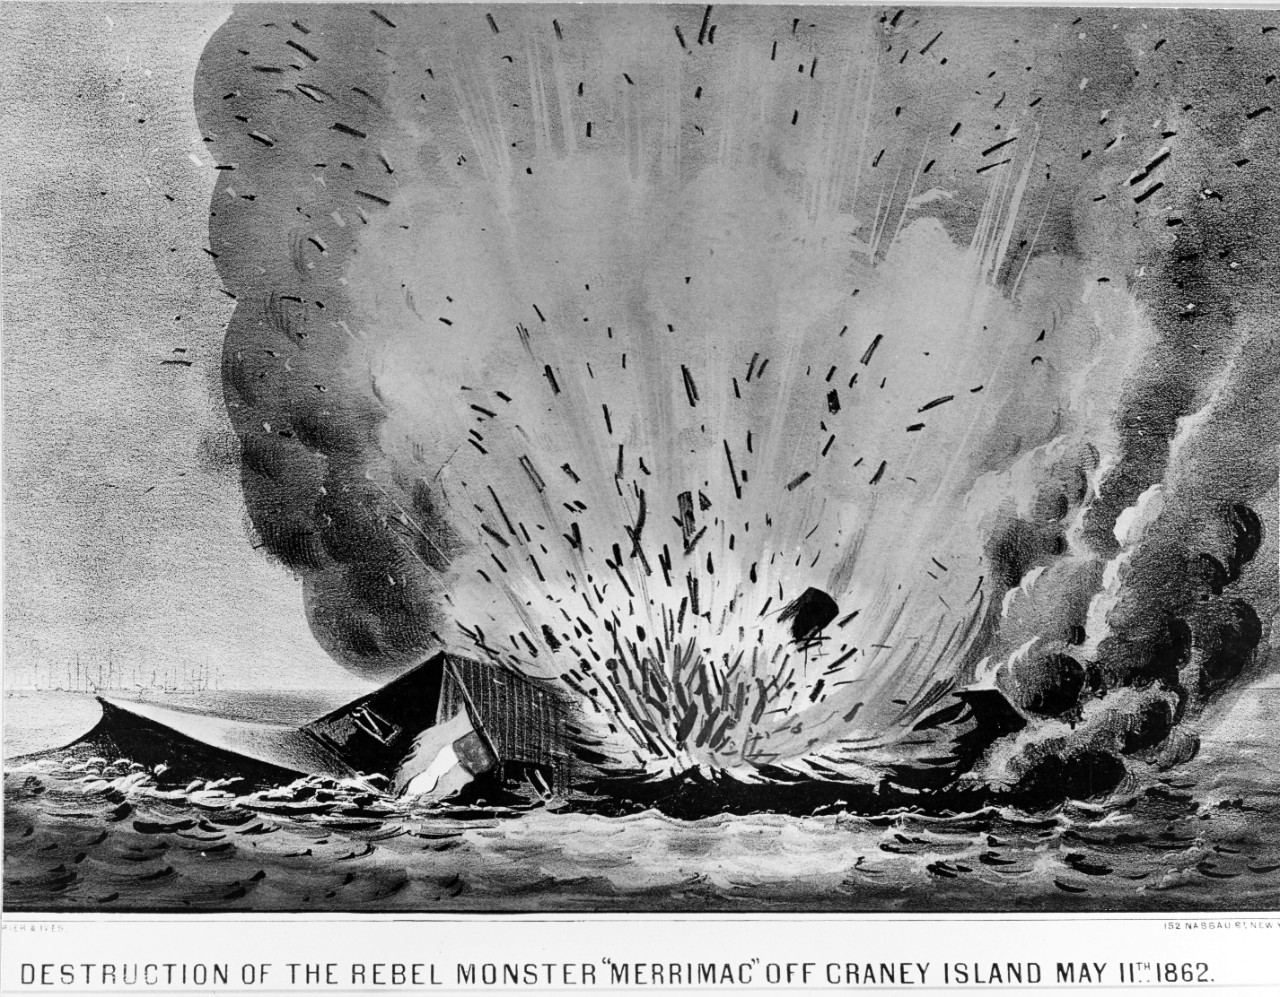 Photo #: NH 58723  &quot;Destruction of the Rebel Monster 'Merrimac' off Craney Island May 11th 1862&quot;